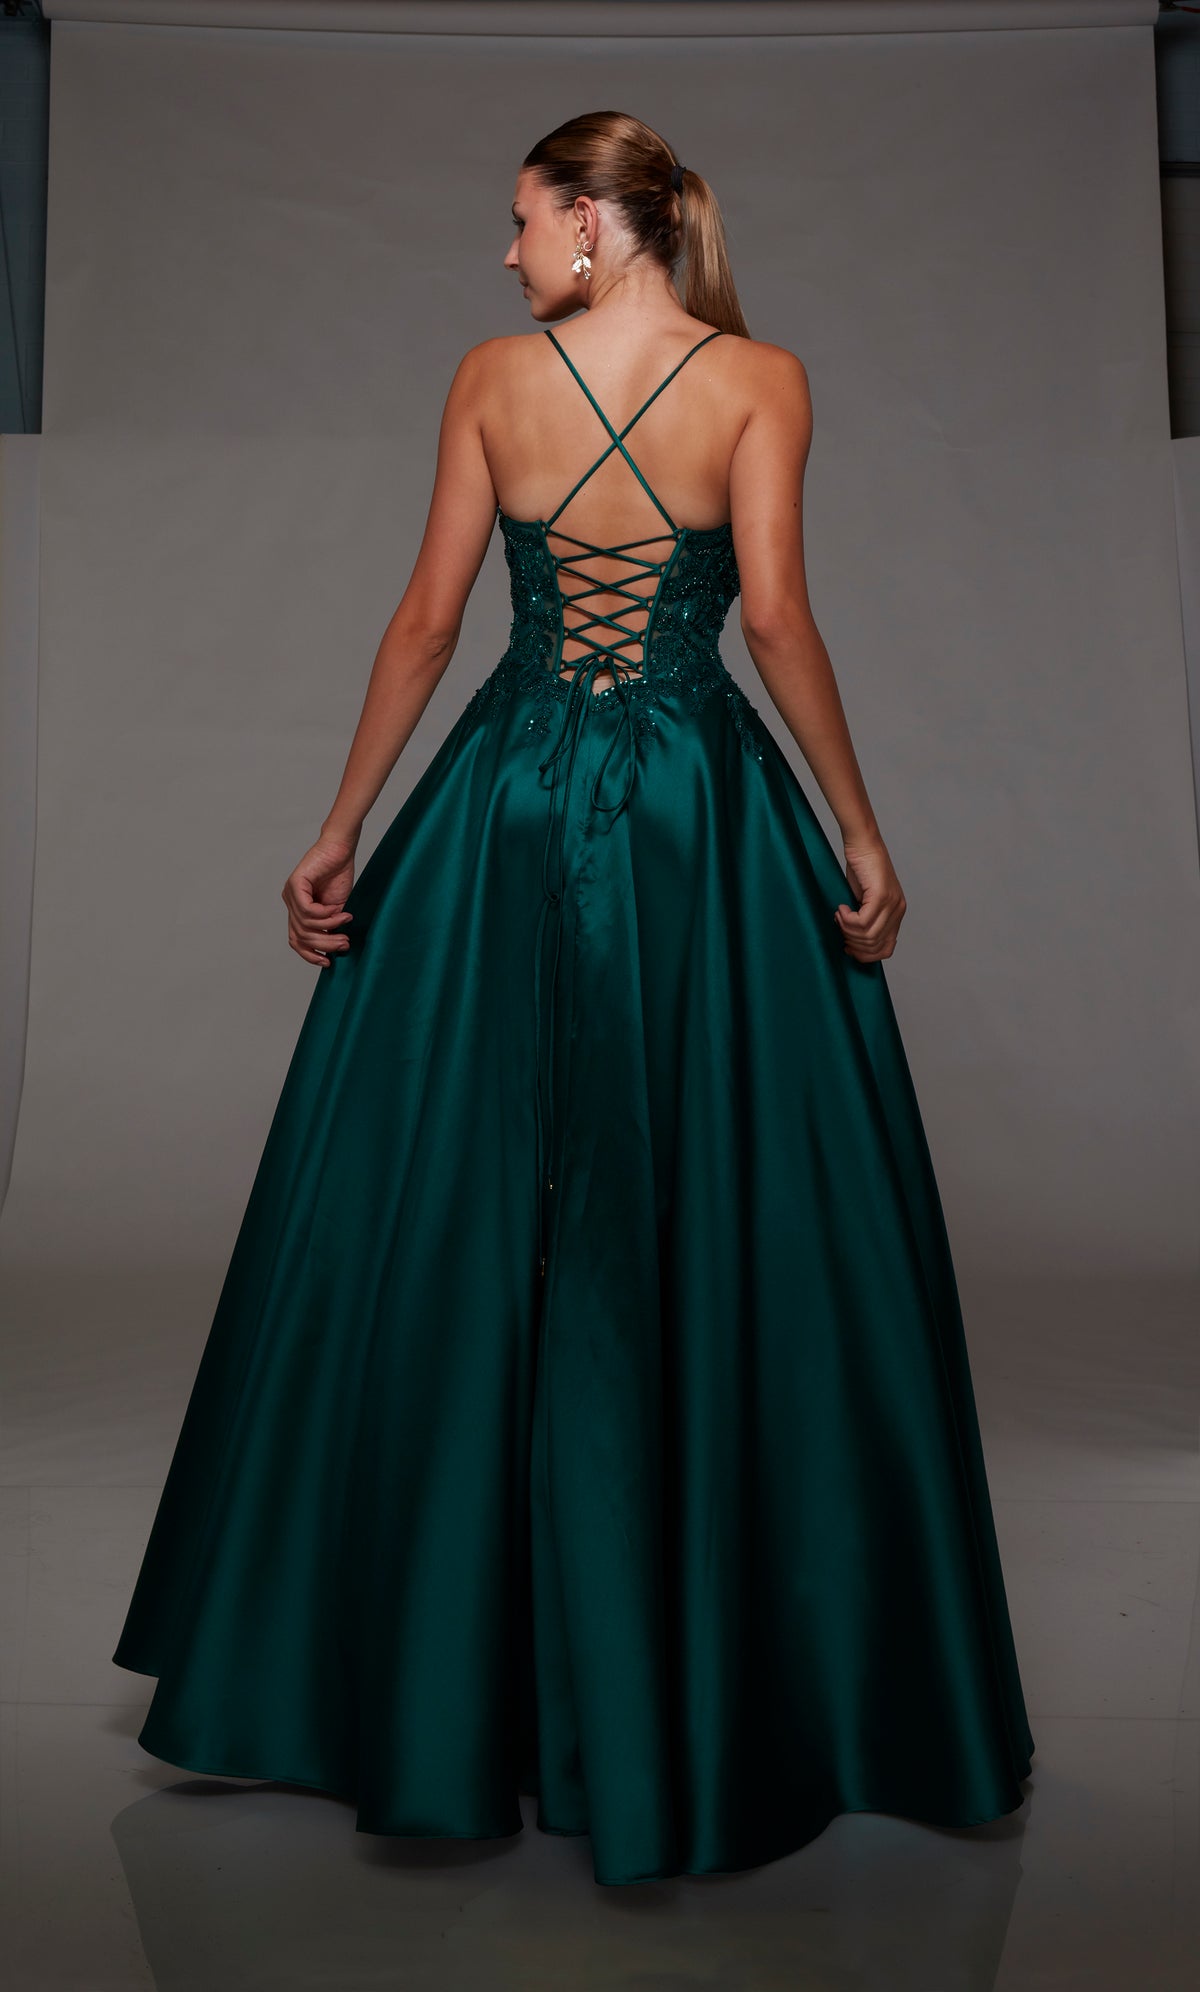 Pine corset ball gown: V-neckline, sheer floral lace bodice, full mikado skirt, lace-up back for an captivating and timeless look.